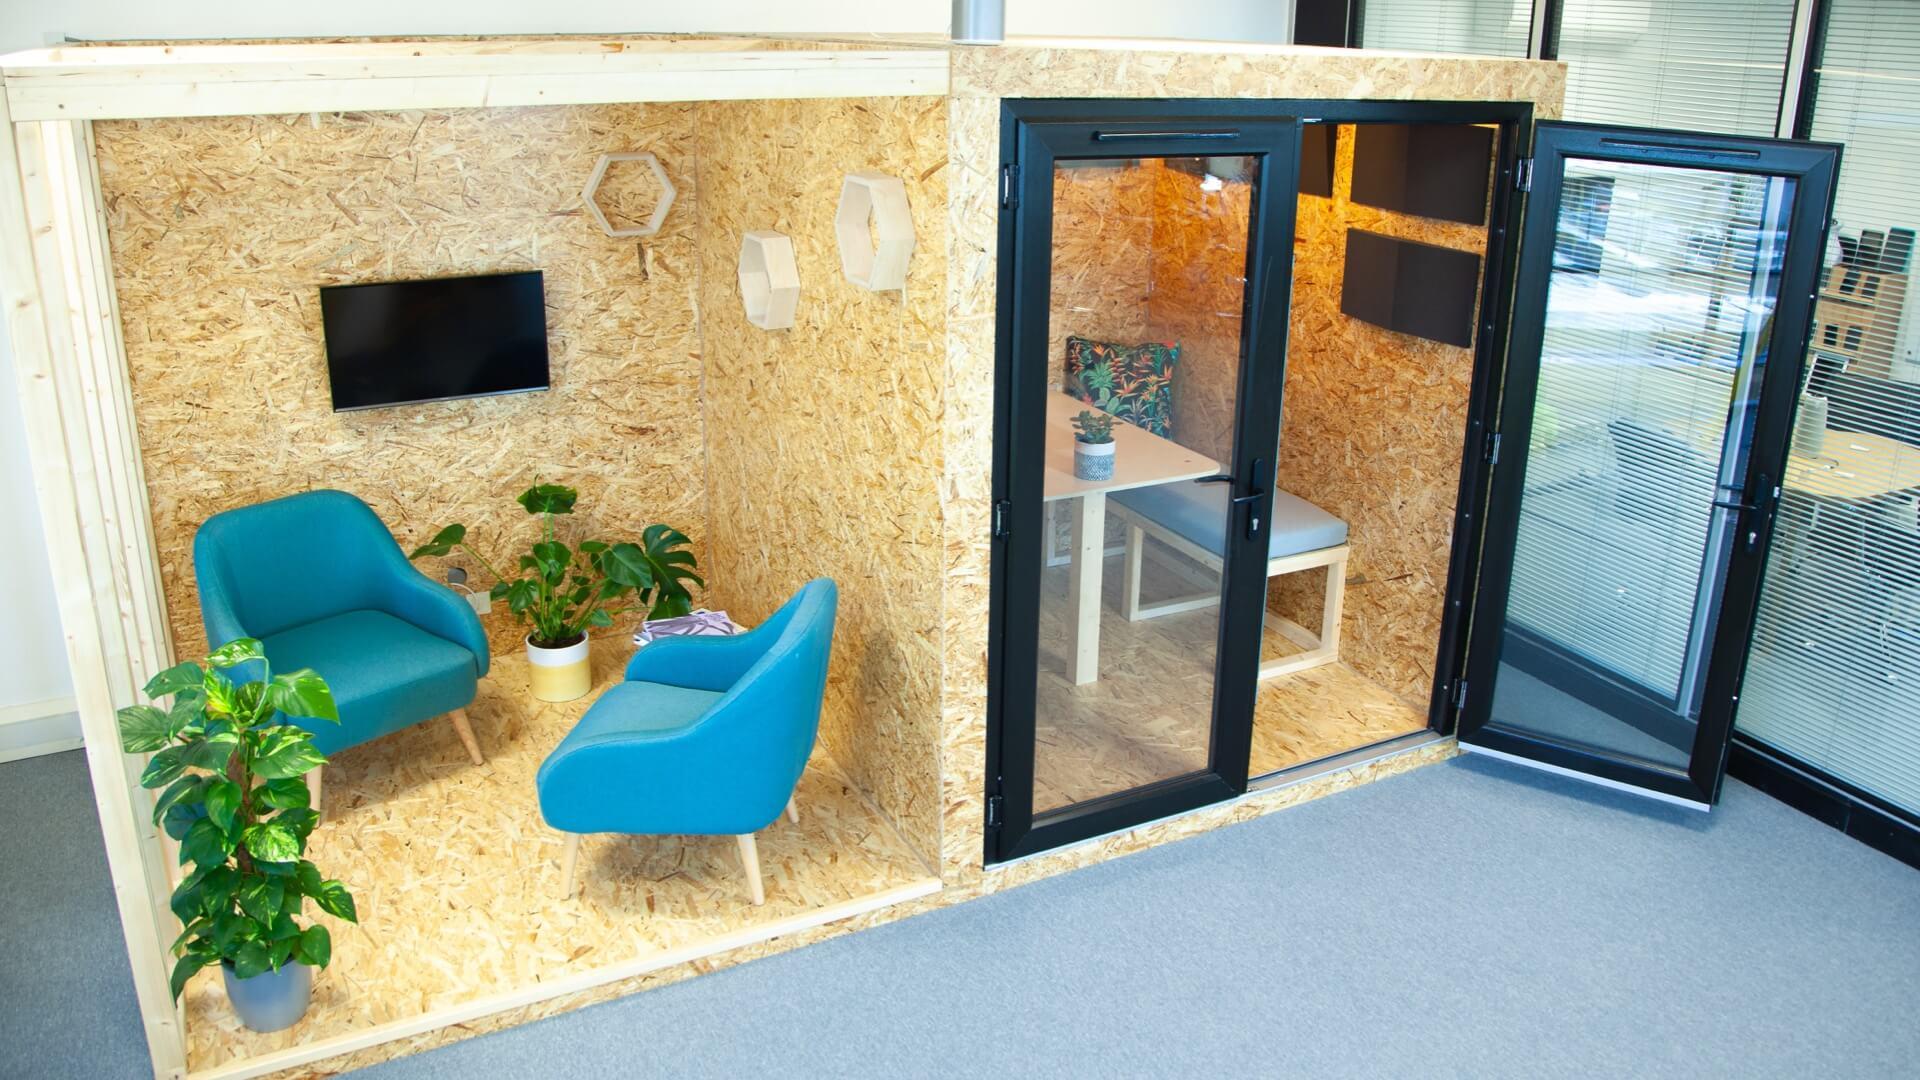 Our pod meeting rooms